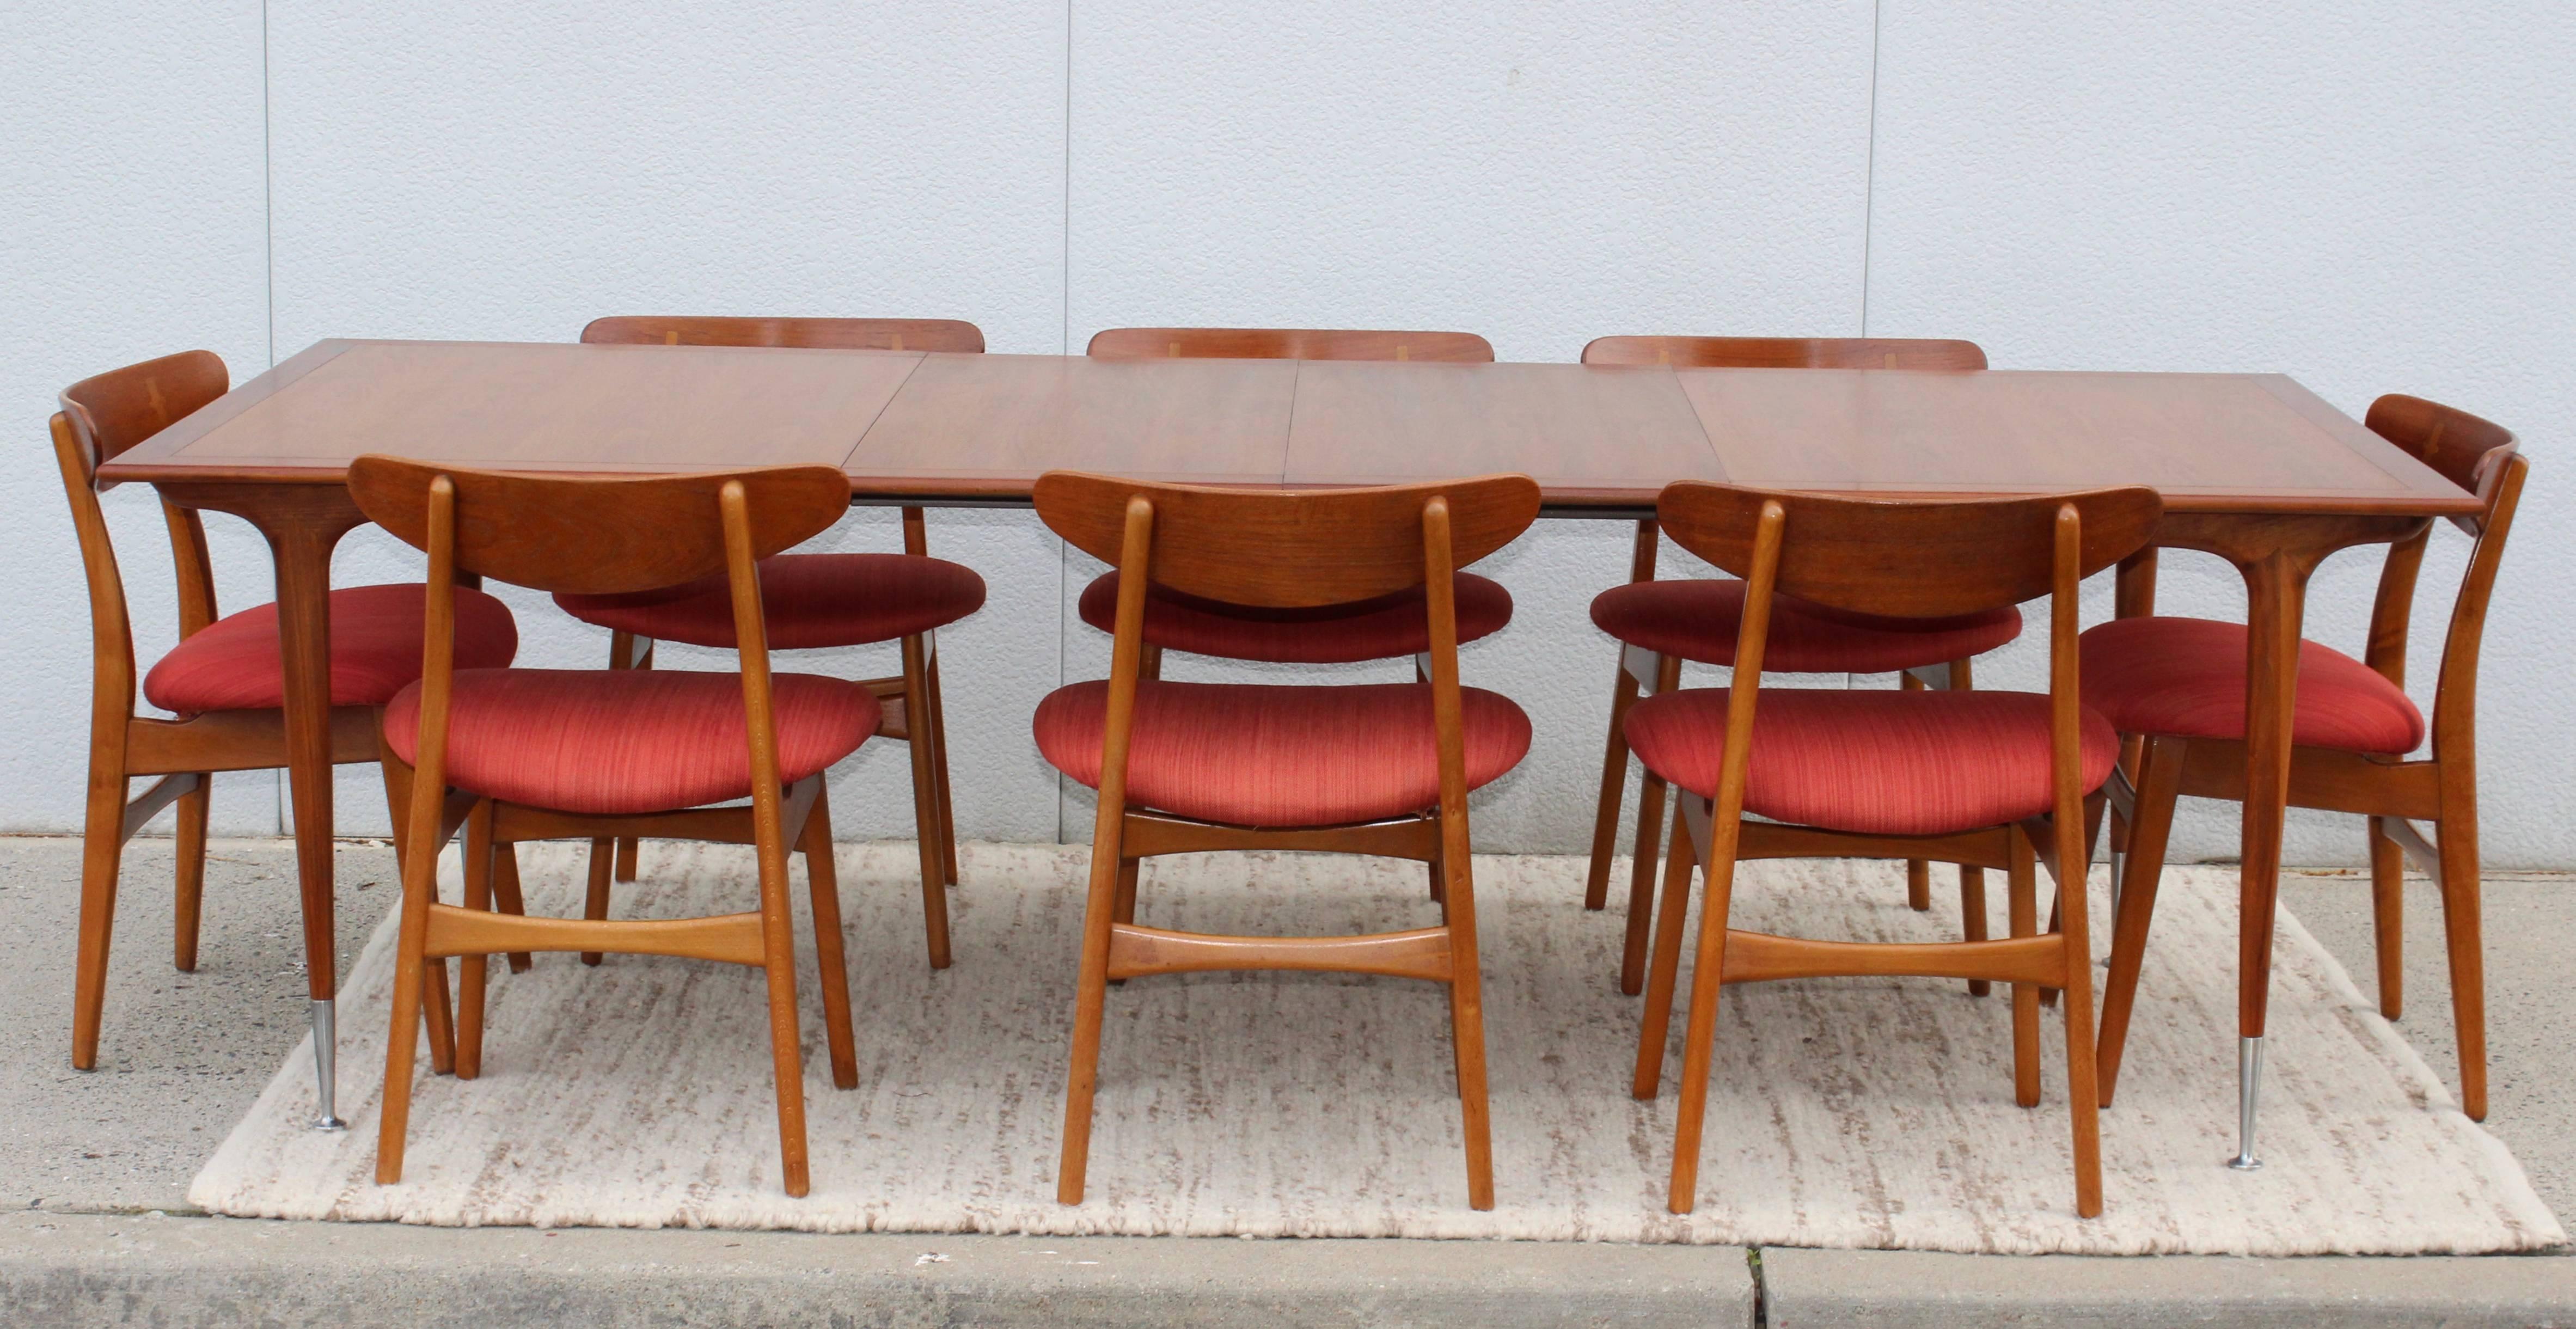 American Mid-Century Modernist Dining Table